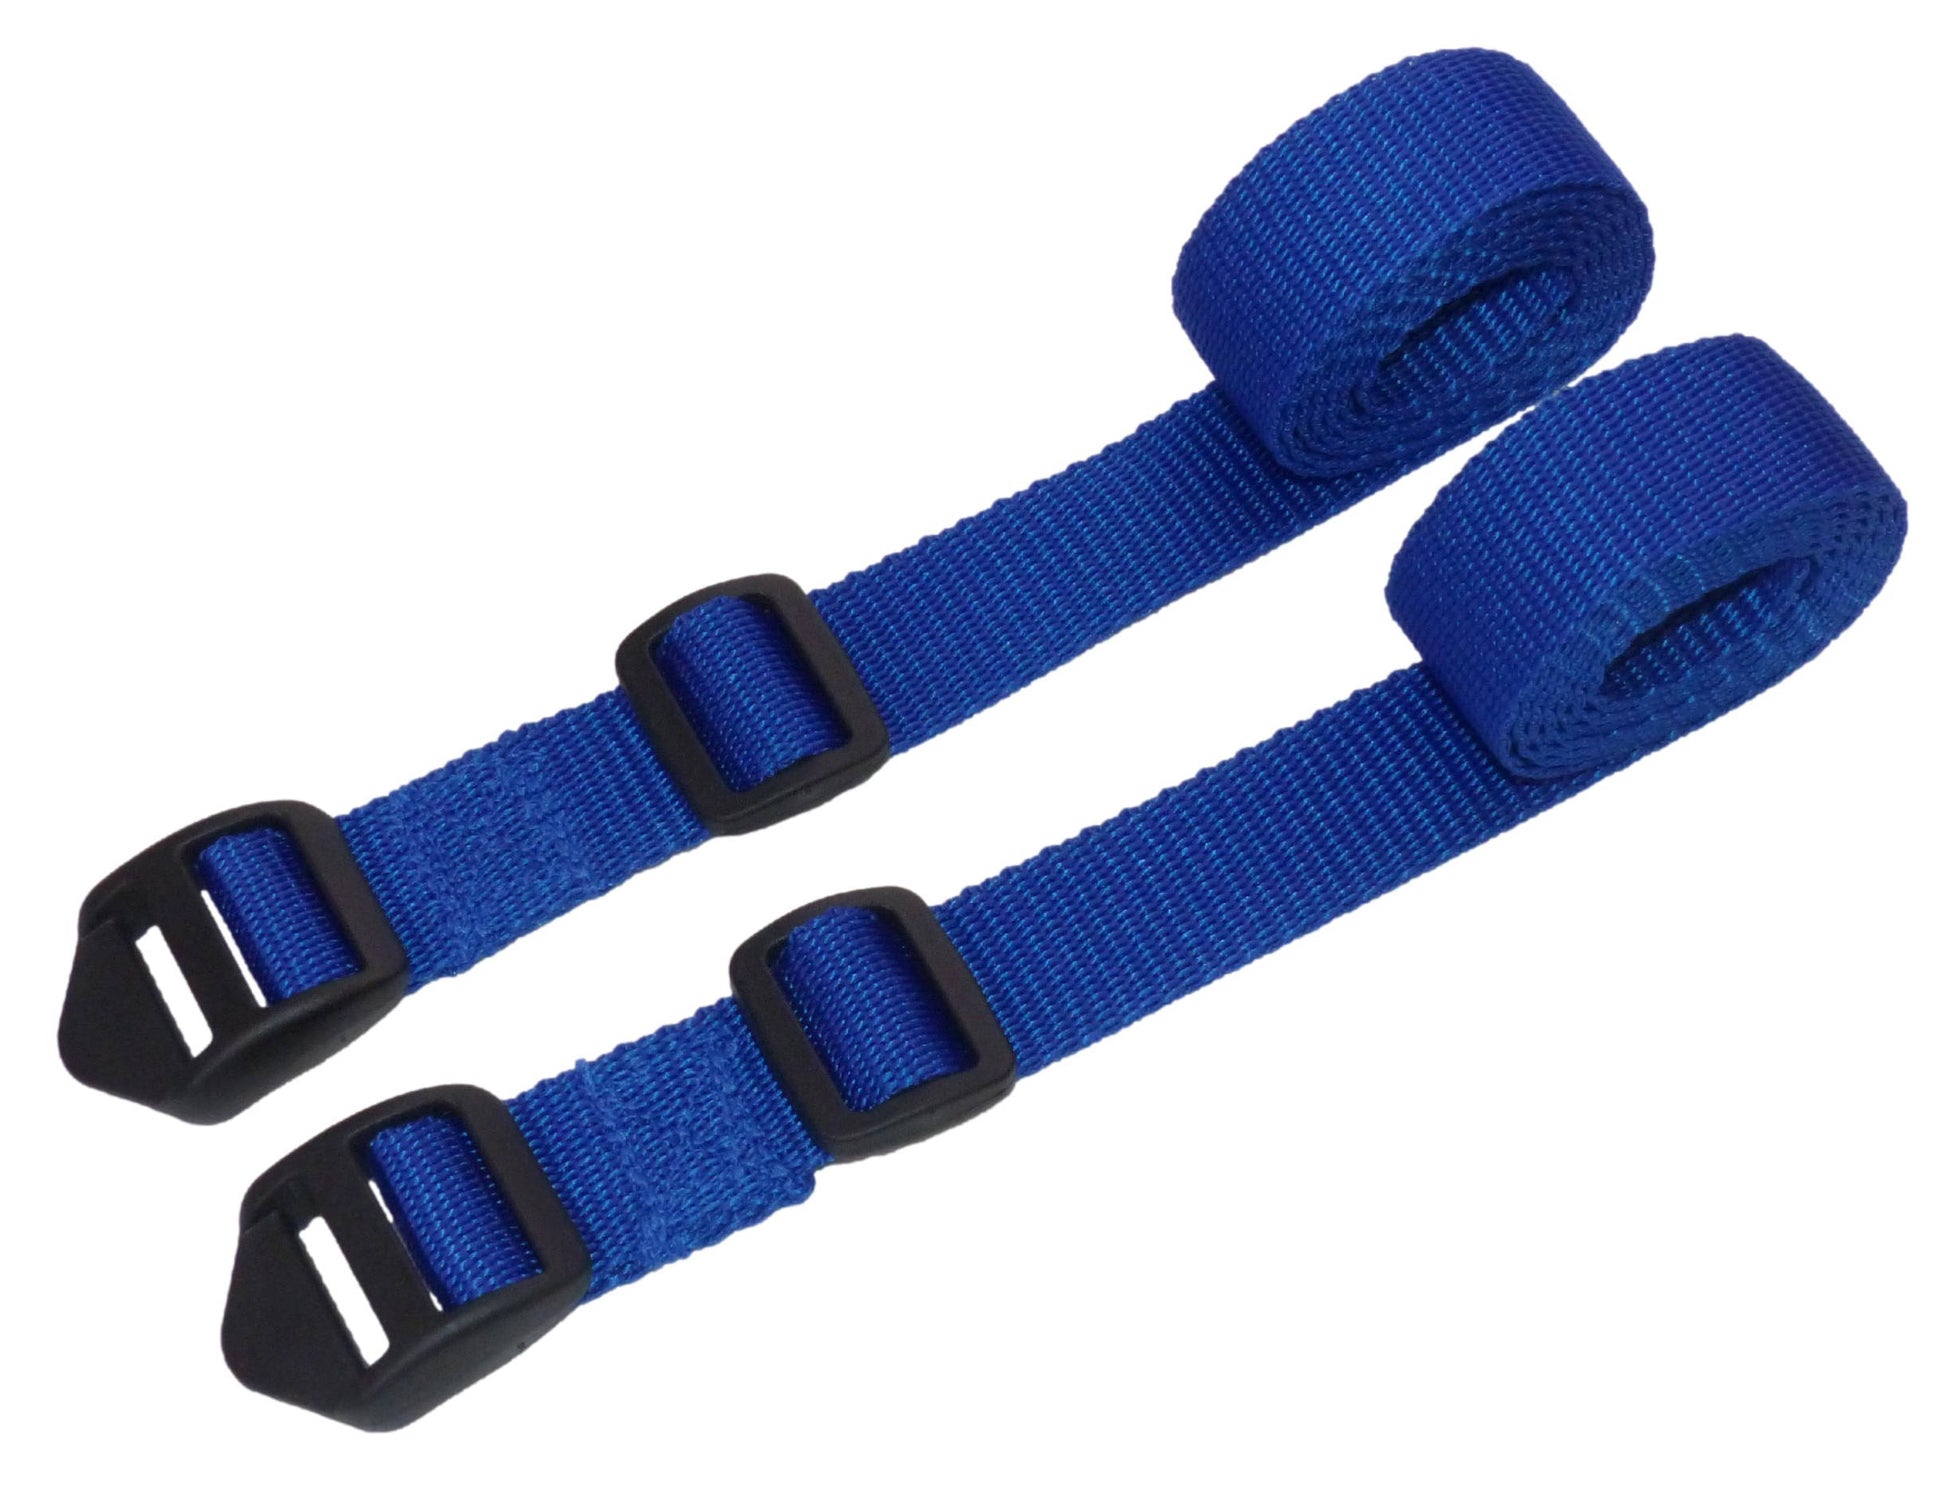 Benristraps 25mm Webbing Strap with Ladderloc Buckle (Pair) in blue